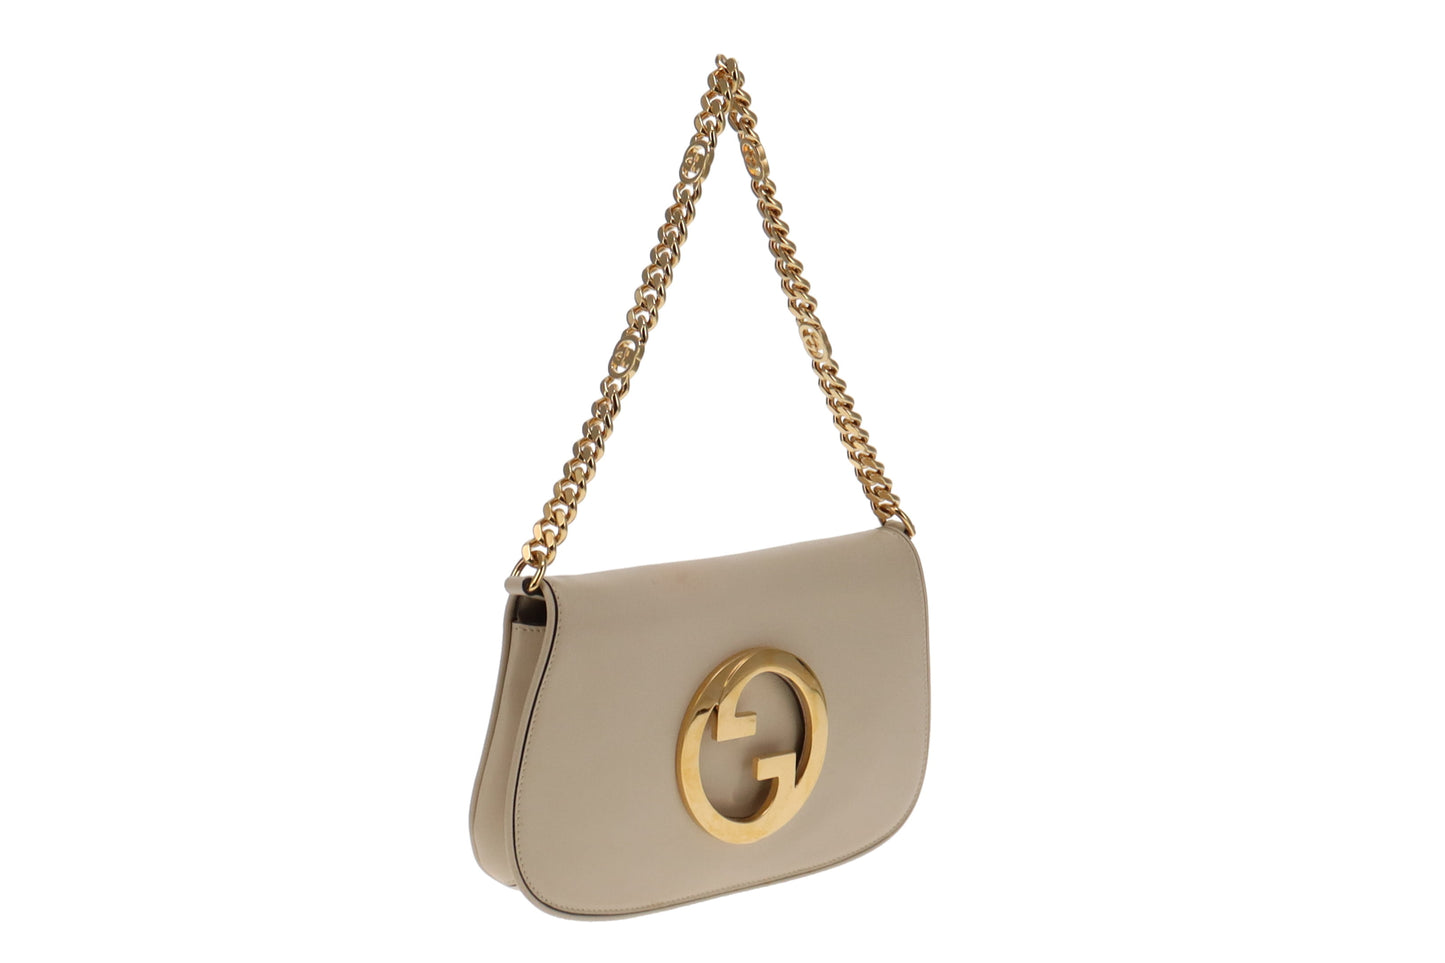 Gucci White Leather Blondie Shoulder Bag with Long Strap